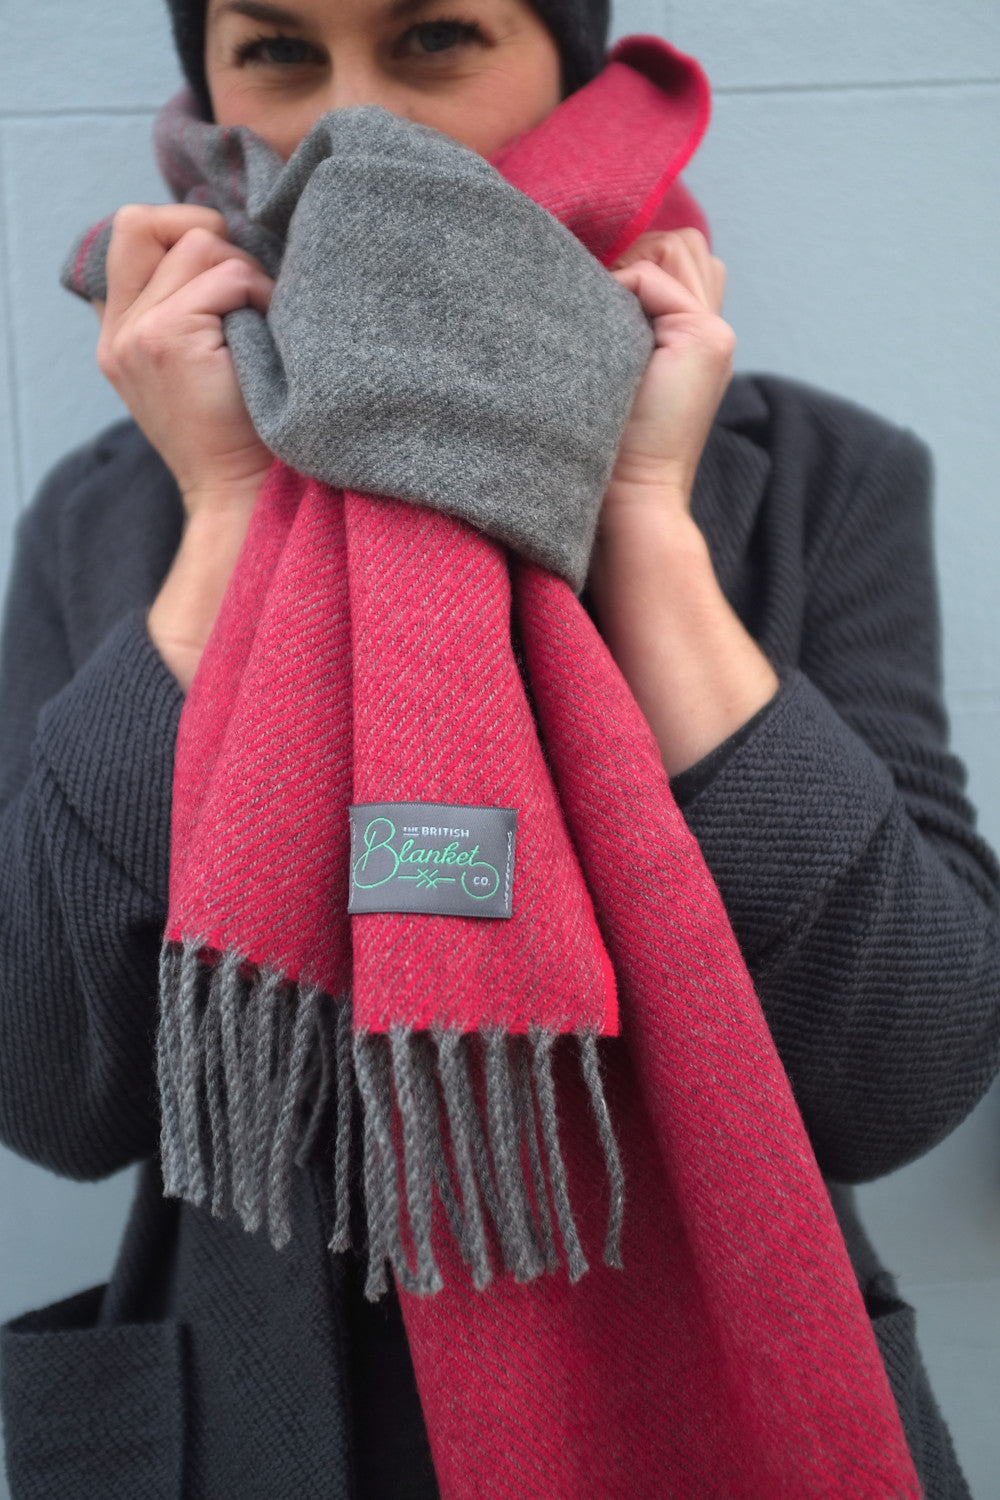 A woman peaking through a red and grey oversized blanket scarf wrapped around her neck